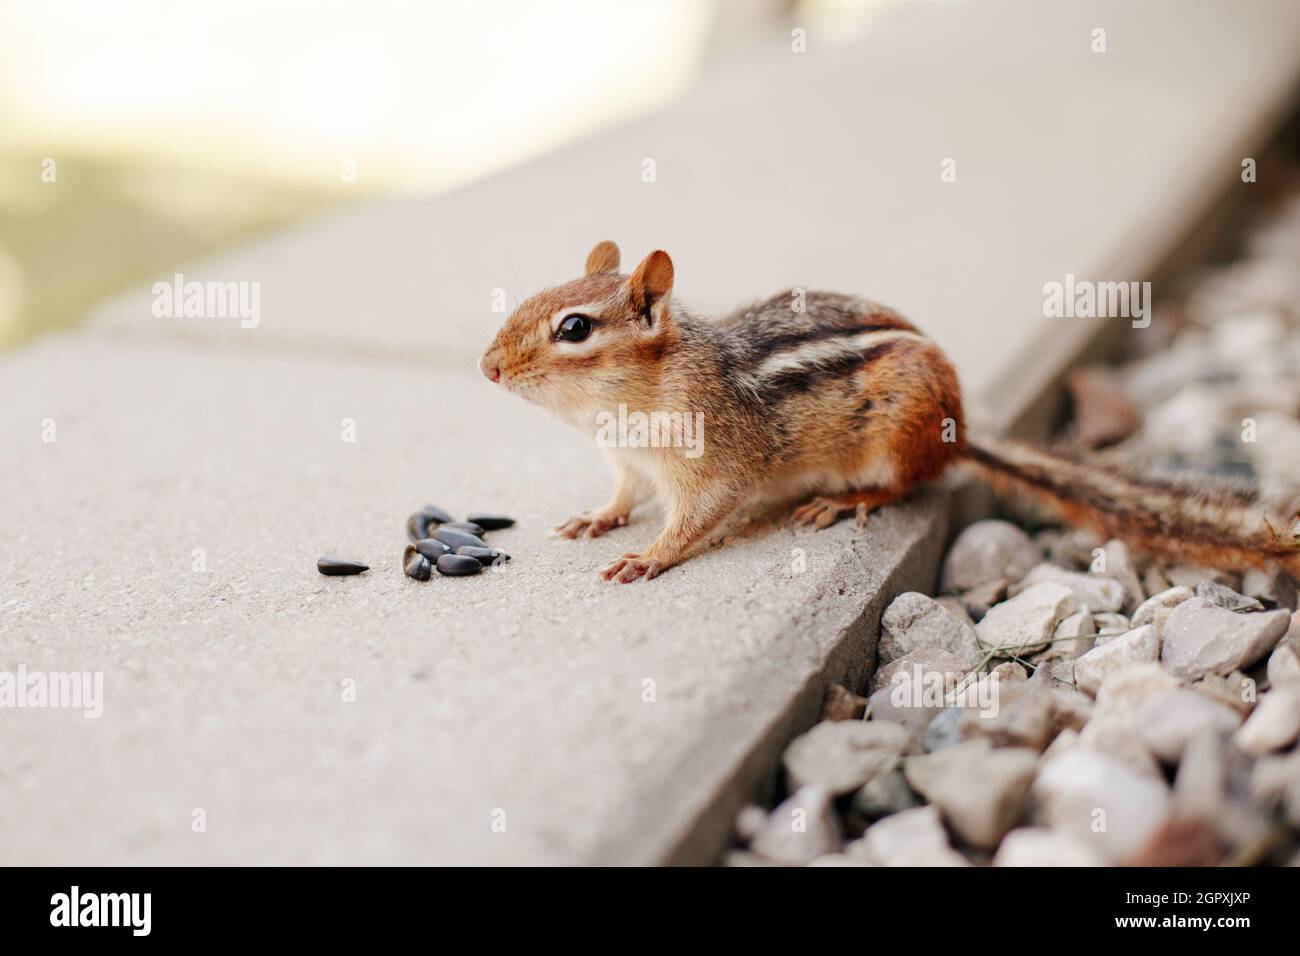 Chipmunk Eating Sunflower Seeds. Wild Animal In Nature Outdoor. Stock Photo